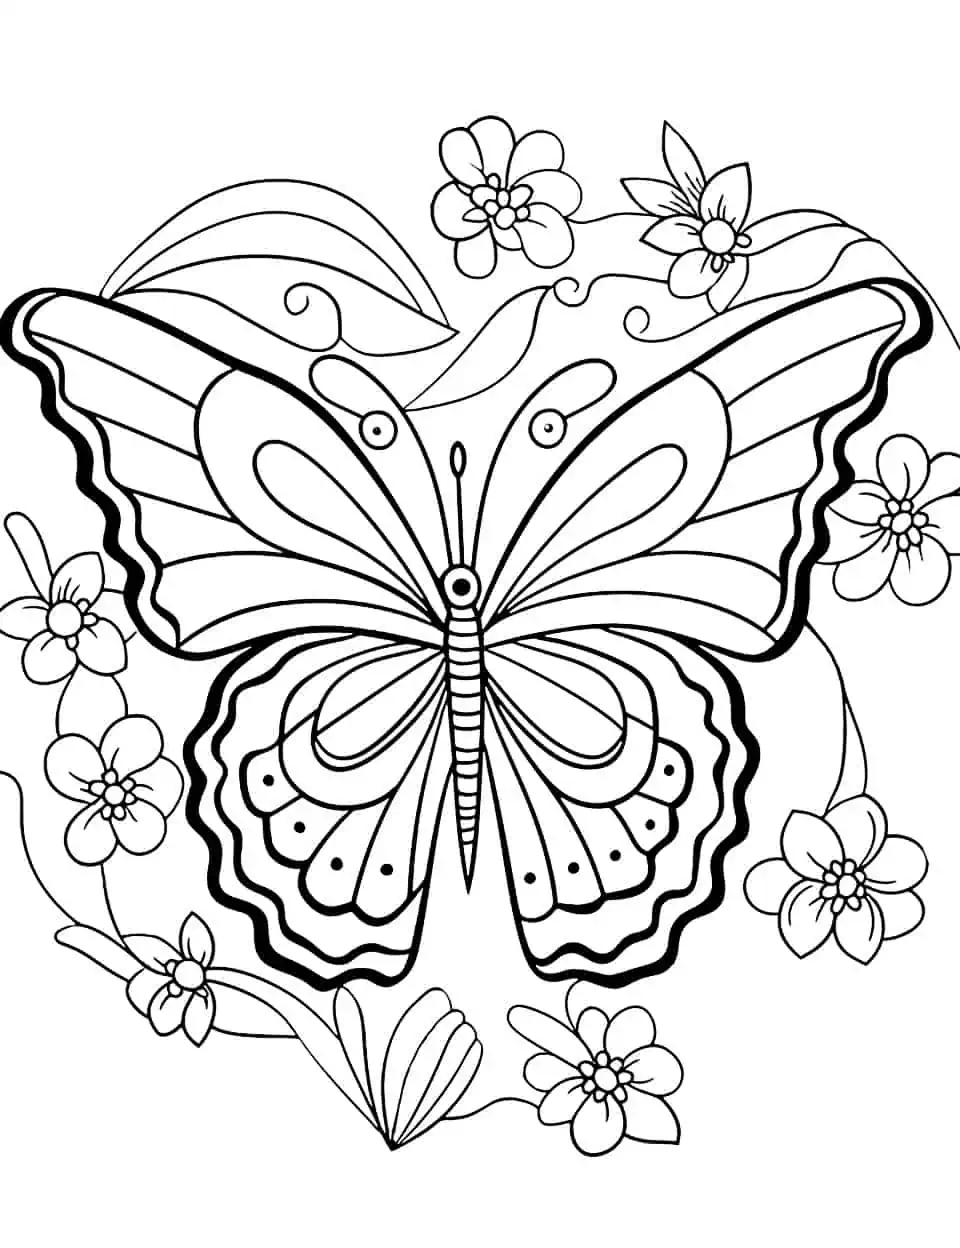 Nature's Palette Butterfly Coloring Page - A coloring page featuring butterflies and flowers in a vibrant display of colors.